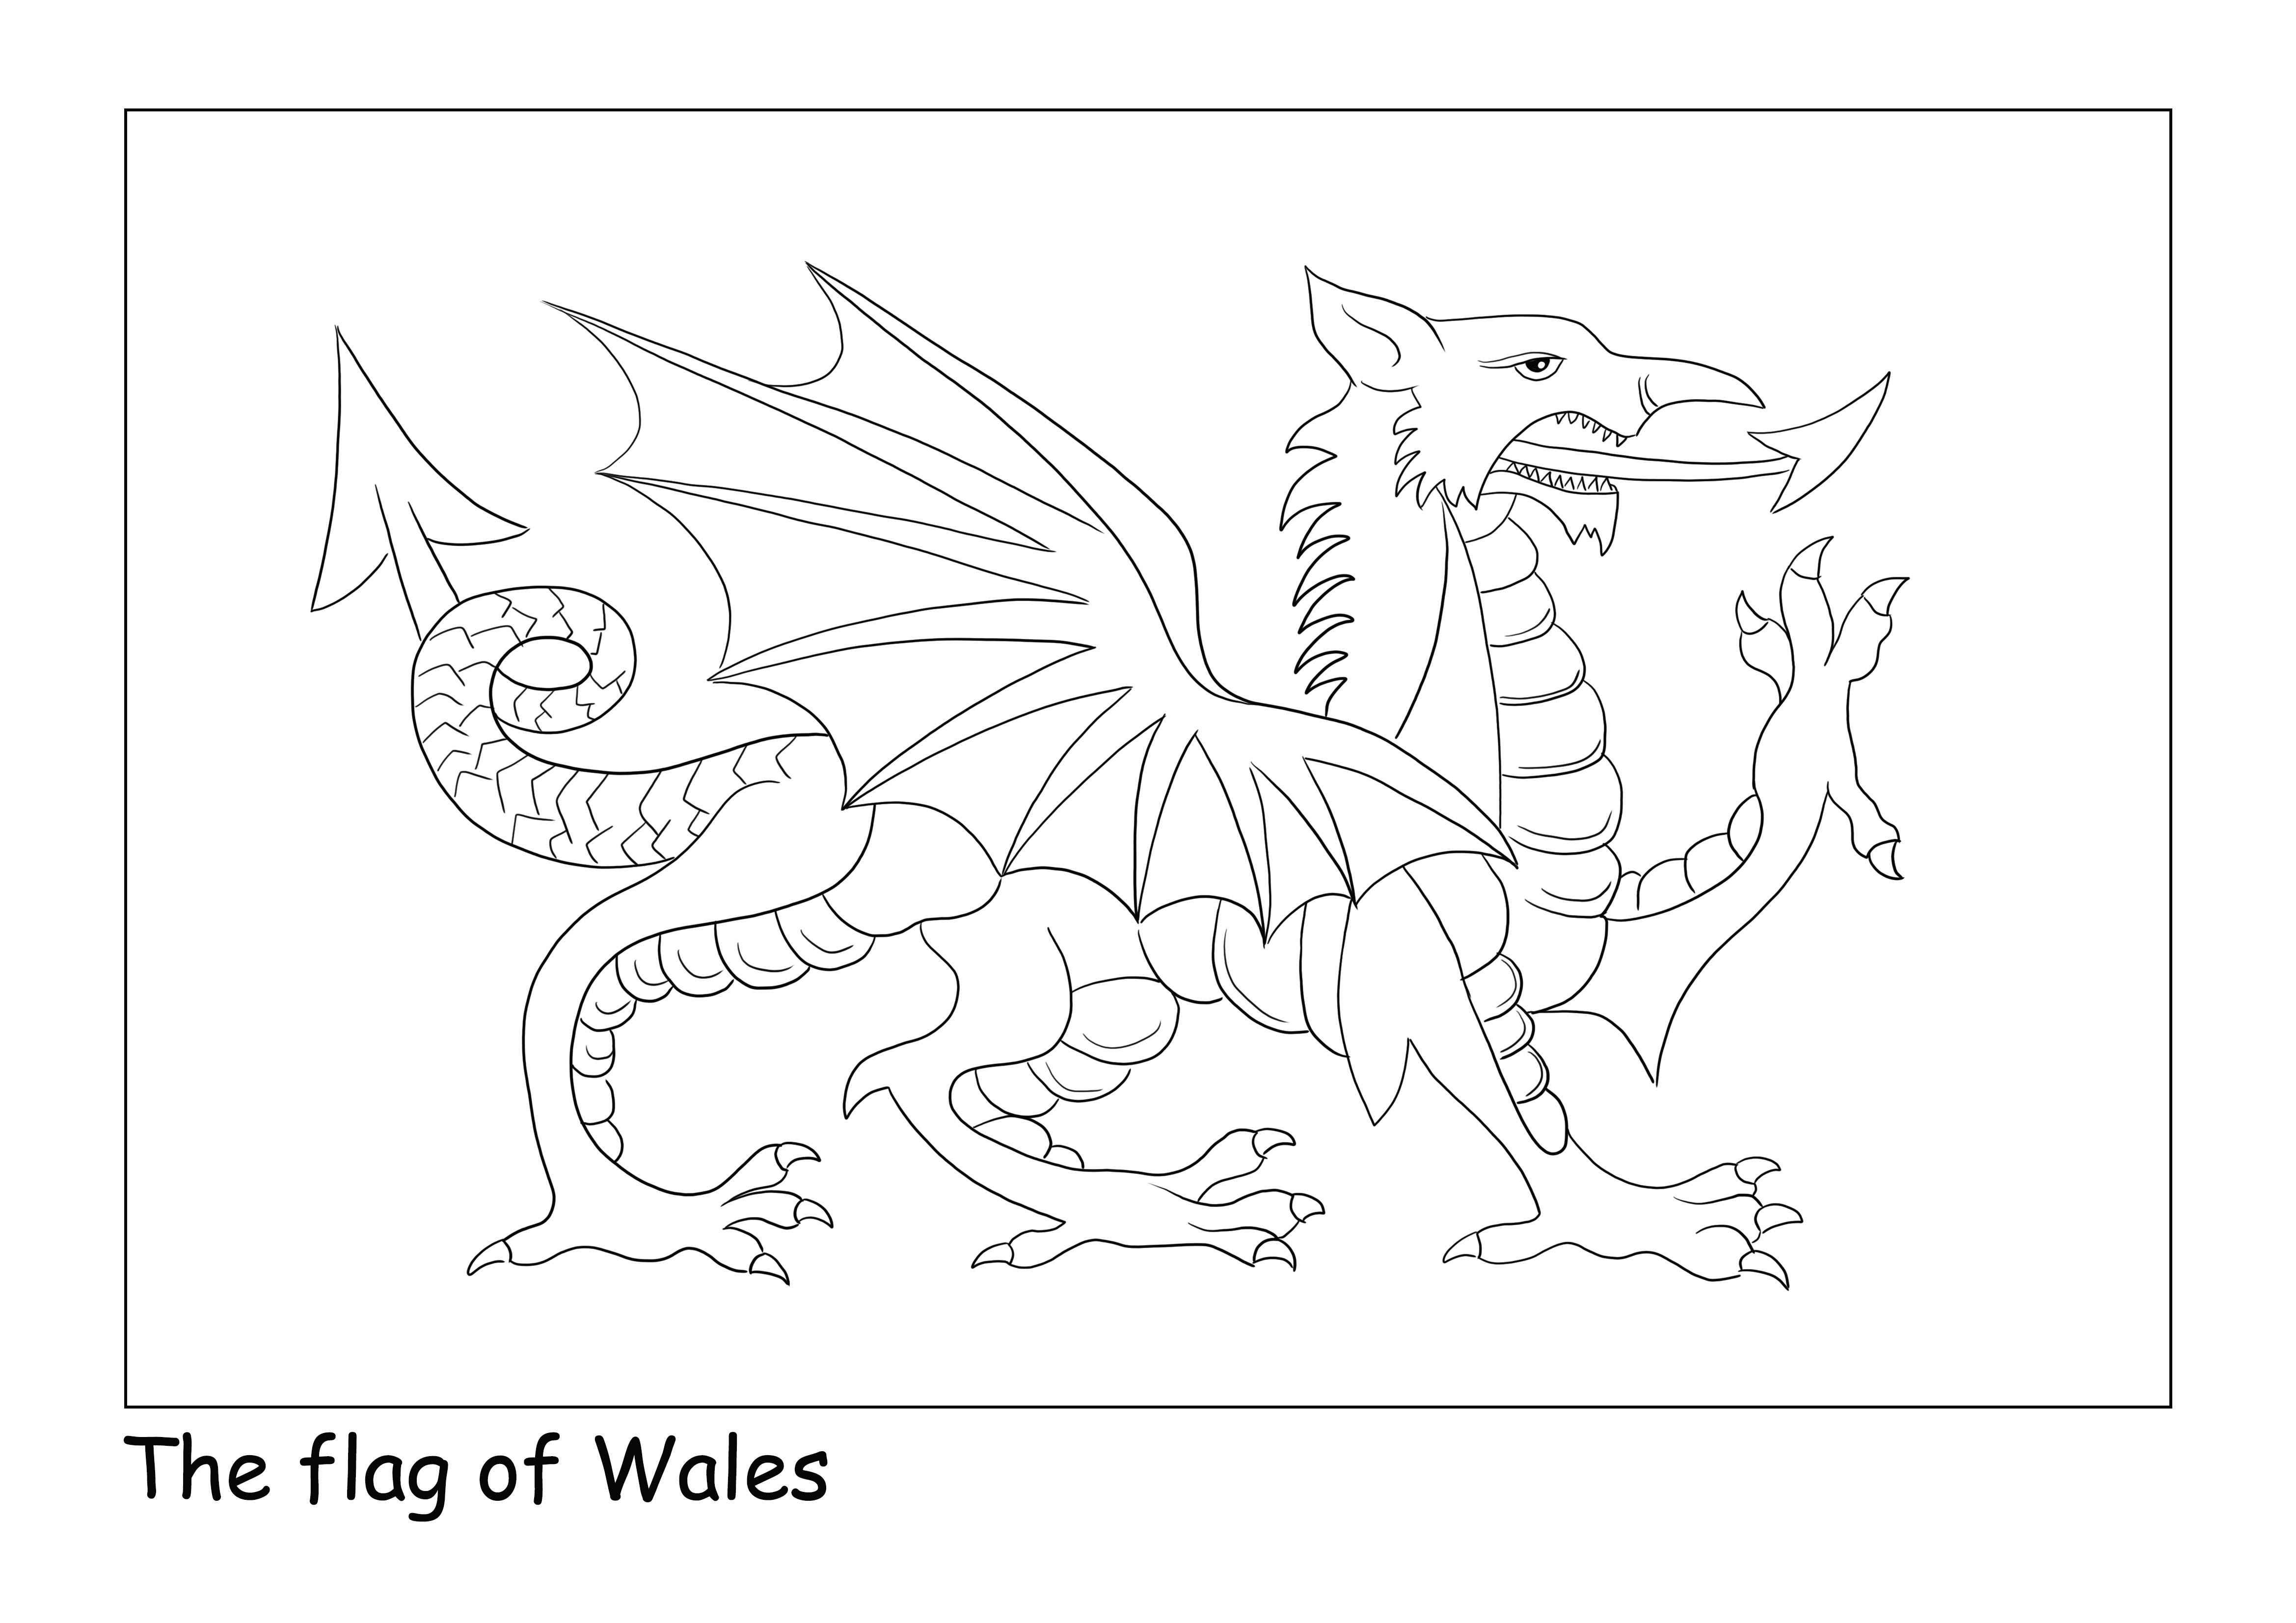 Flag of Wales on plain page for easy coloring and downloading sheet